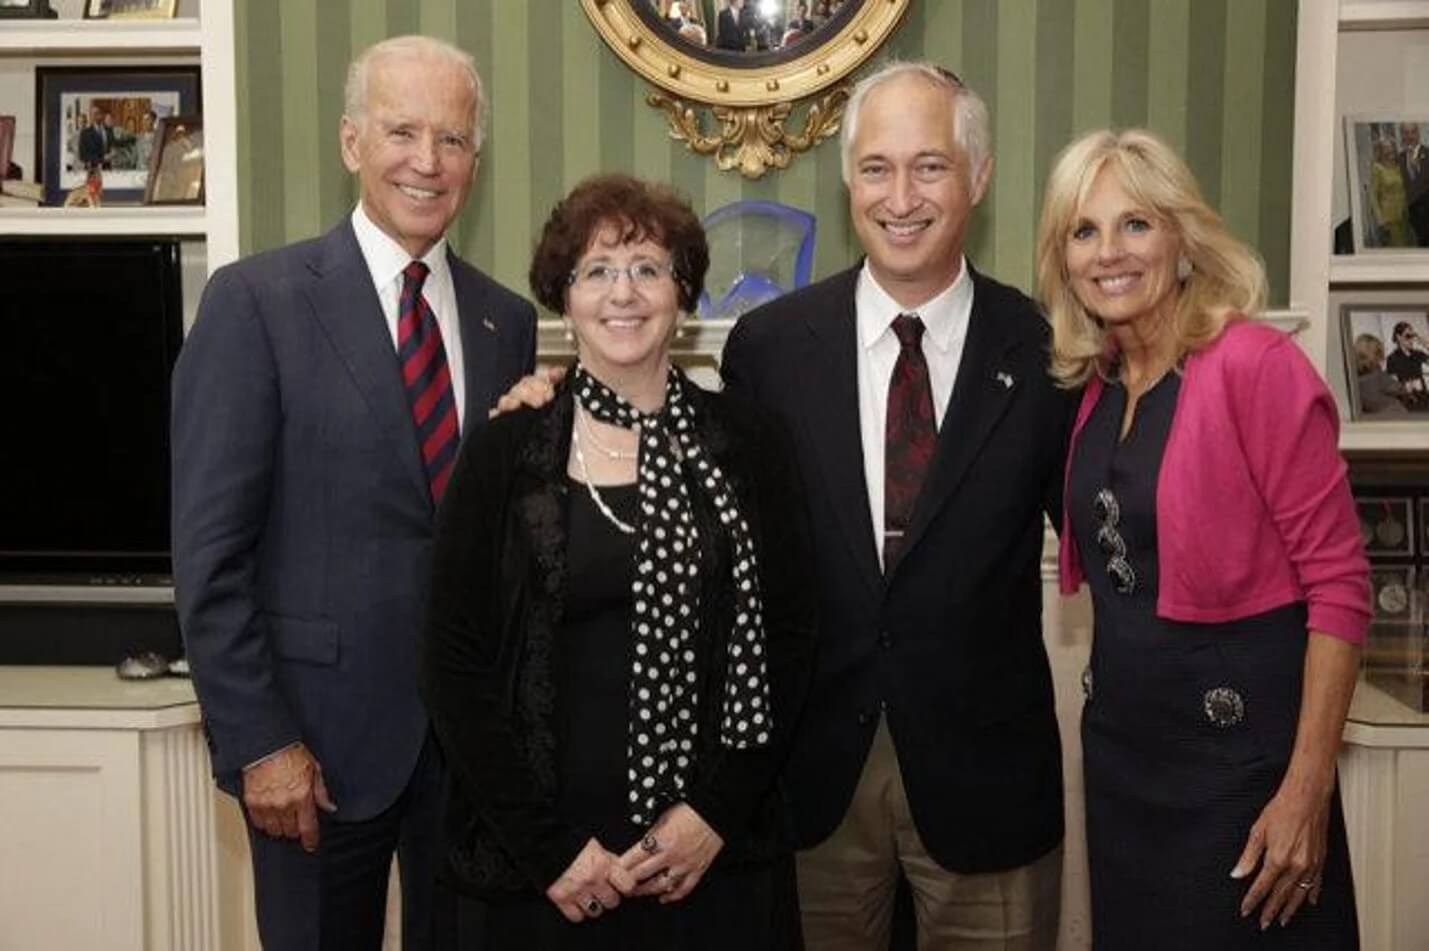 Then-Vice President Joe Biden and Dr. Jill Biden with Rabbi Michael Beals and his wife, Dr. Elissa Green.